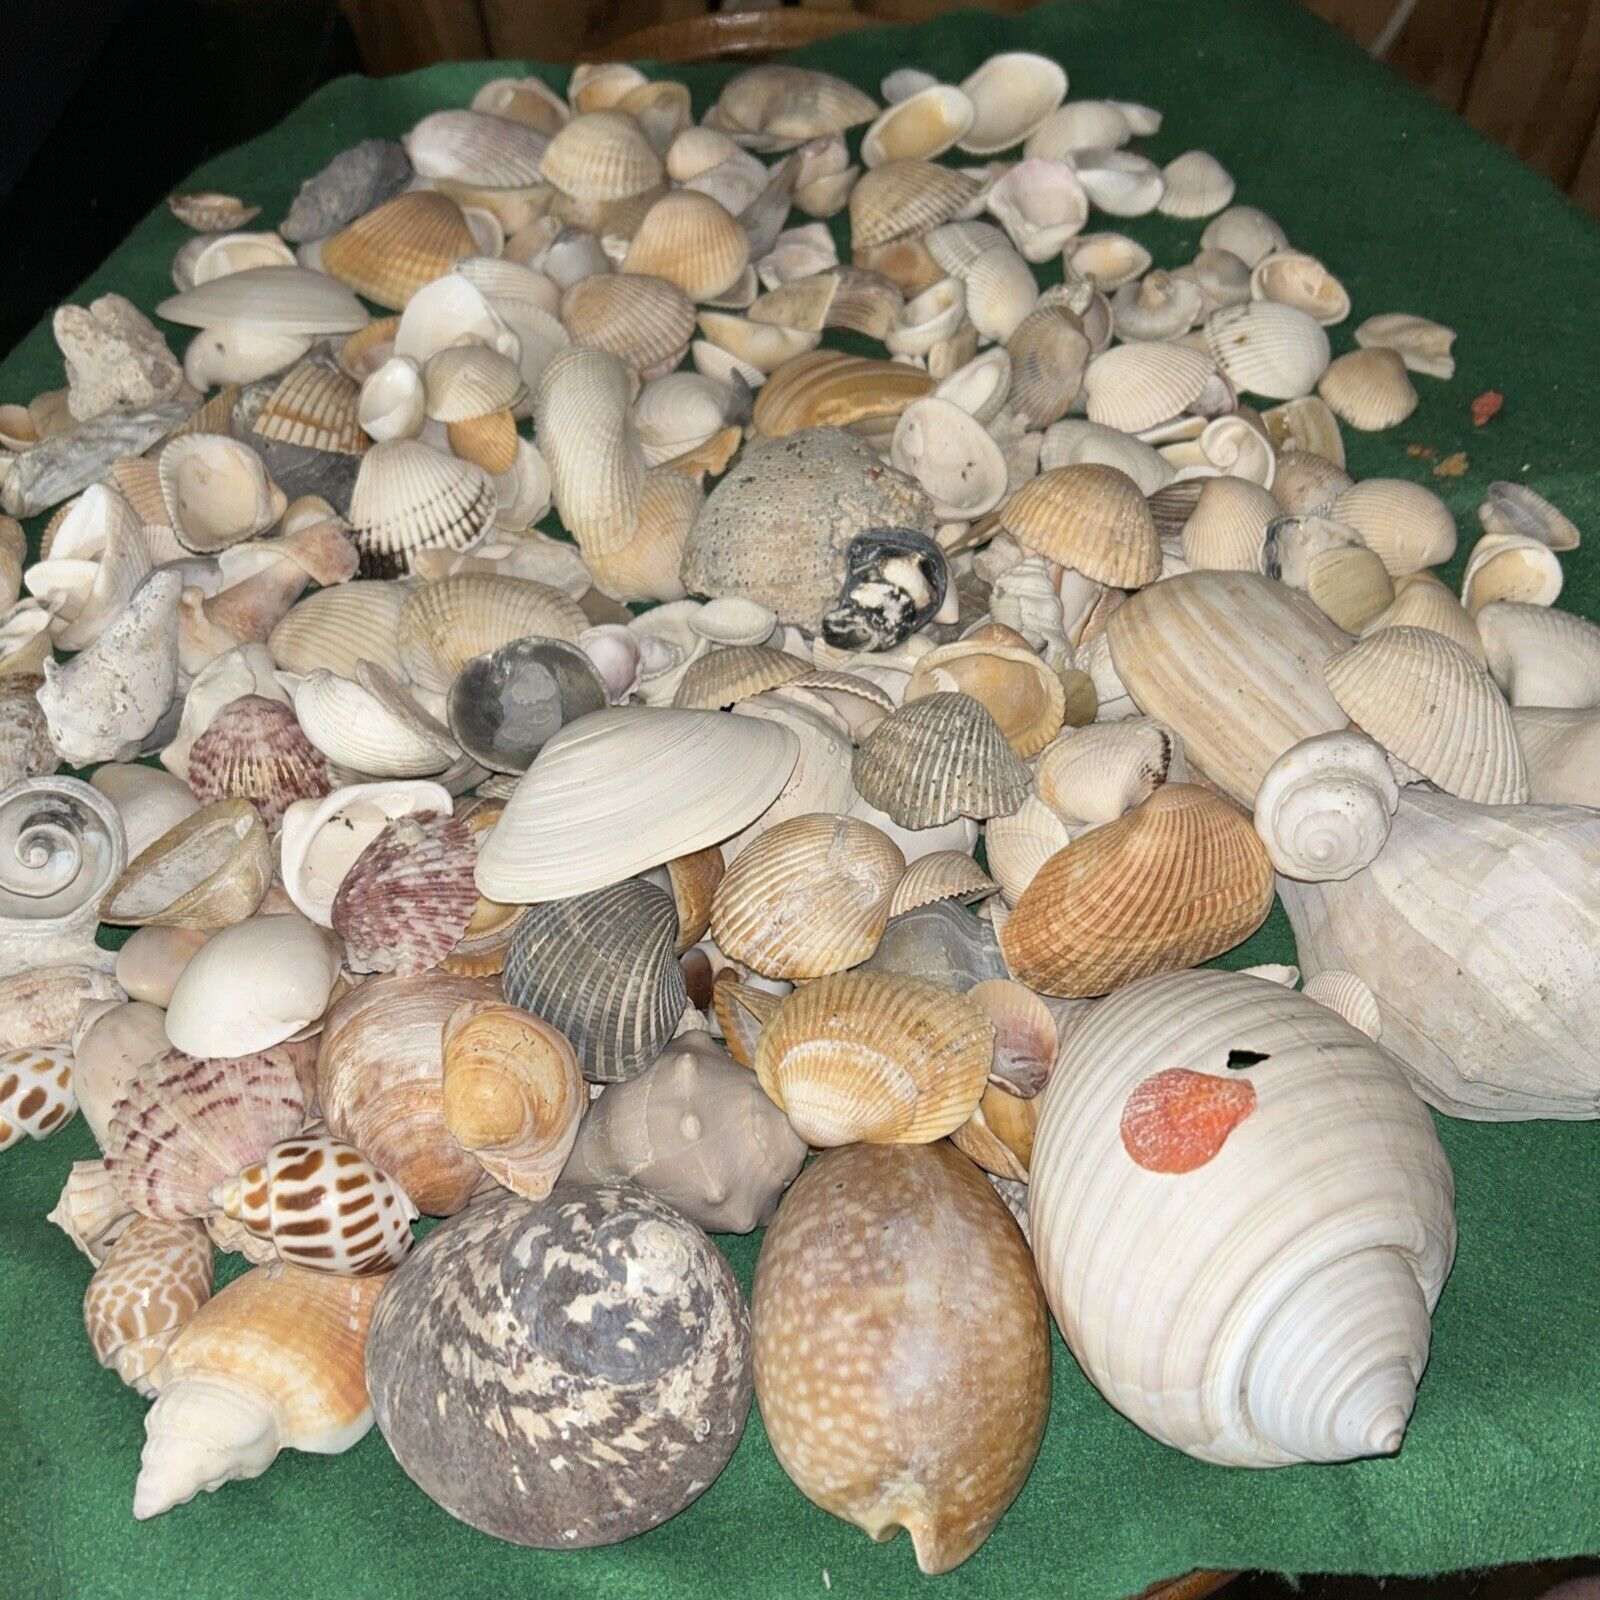 Huge Lot of Assorted Vintage Seashells Conch, Clam, Snail ART CRAFTS 9lbs Ocean